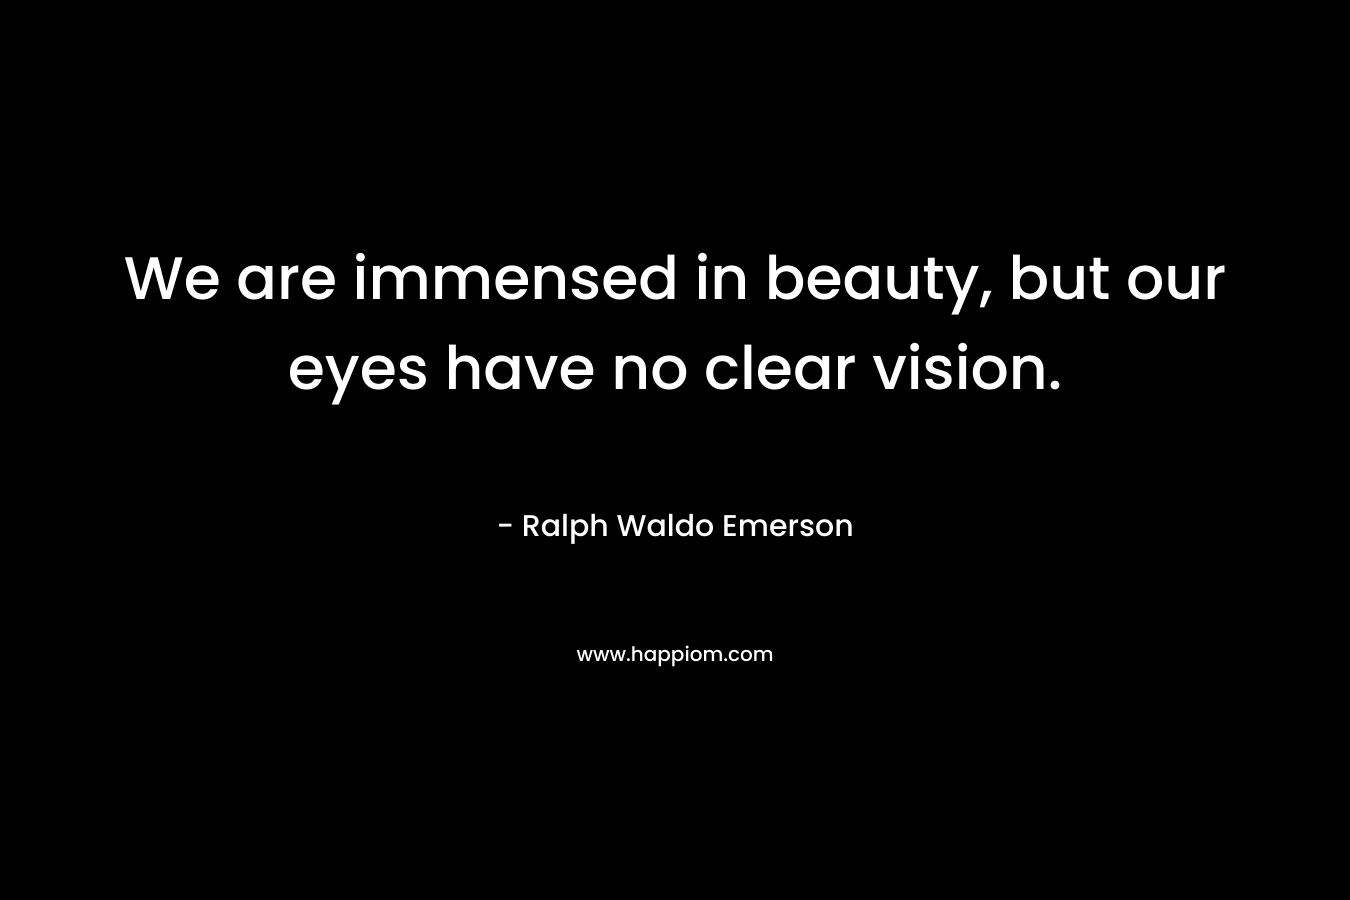 We are immensed in beauty, but our eyes have no clear vision.